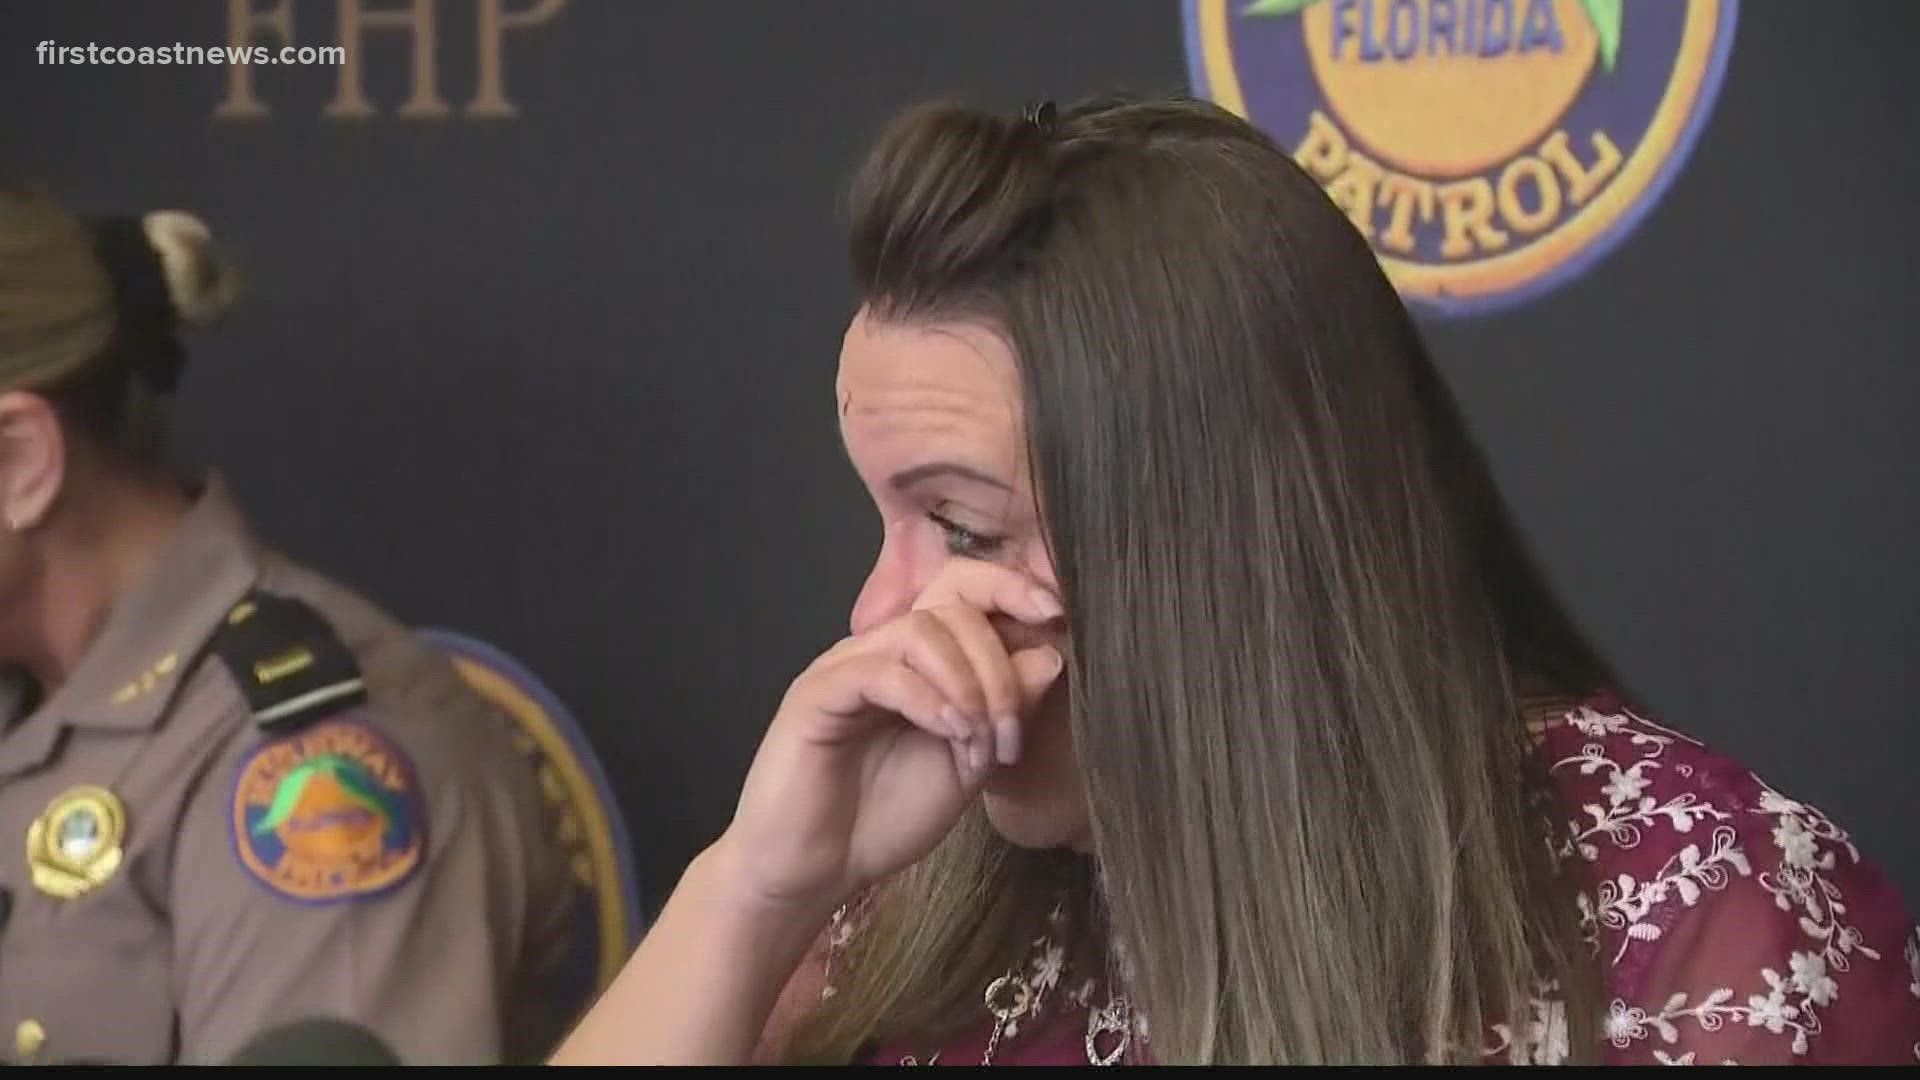 Master Trooper Toni Schuck broke down in tears as she recalled crashing into the suspected drunk driver's car to protect everyone at the event.